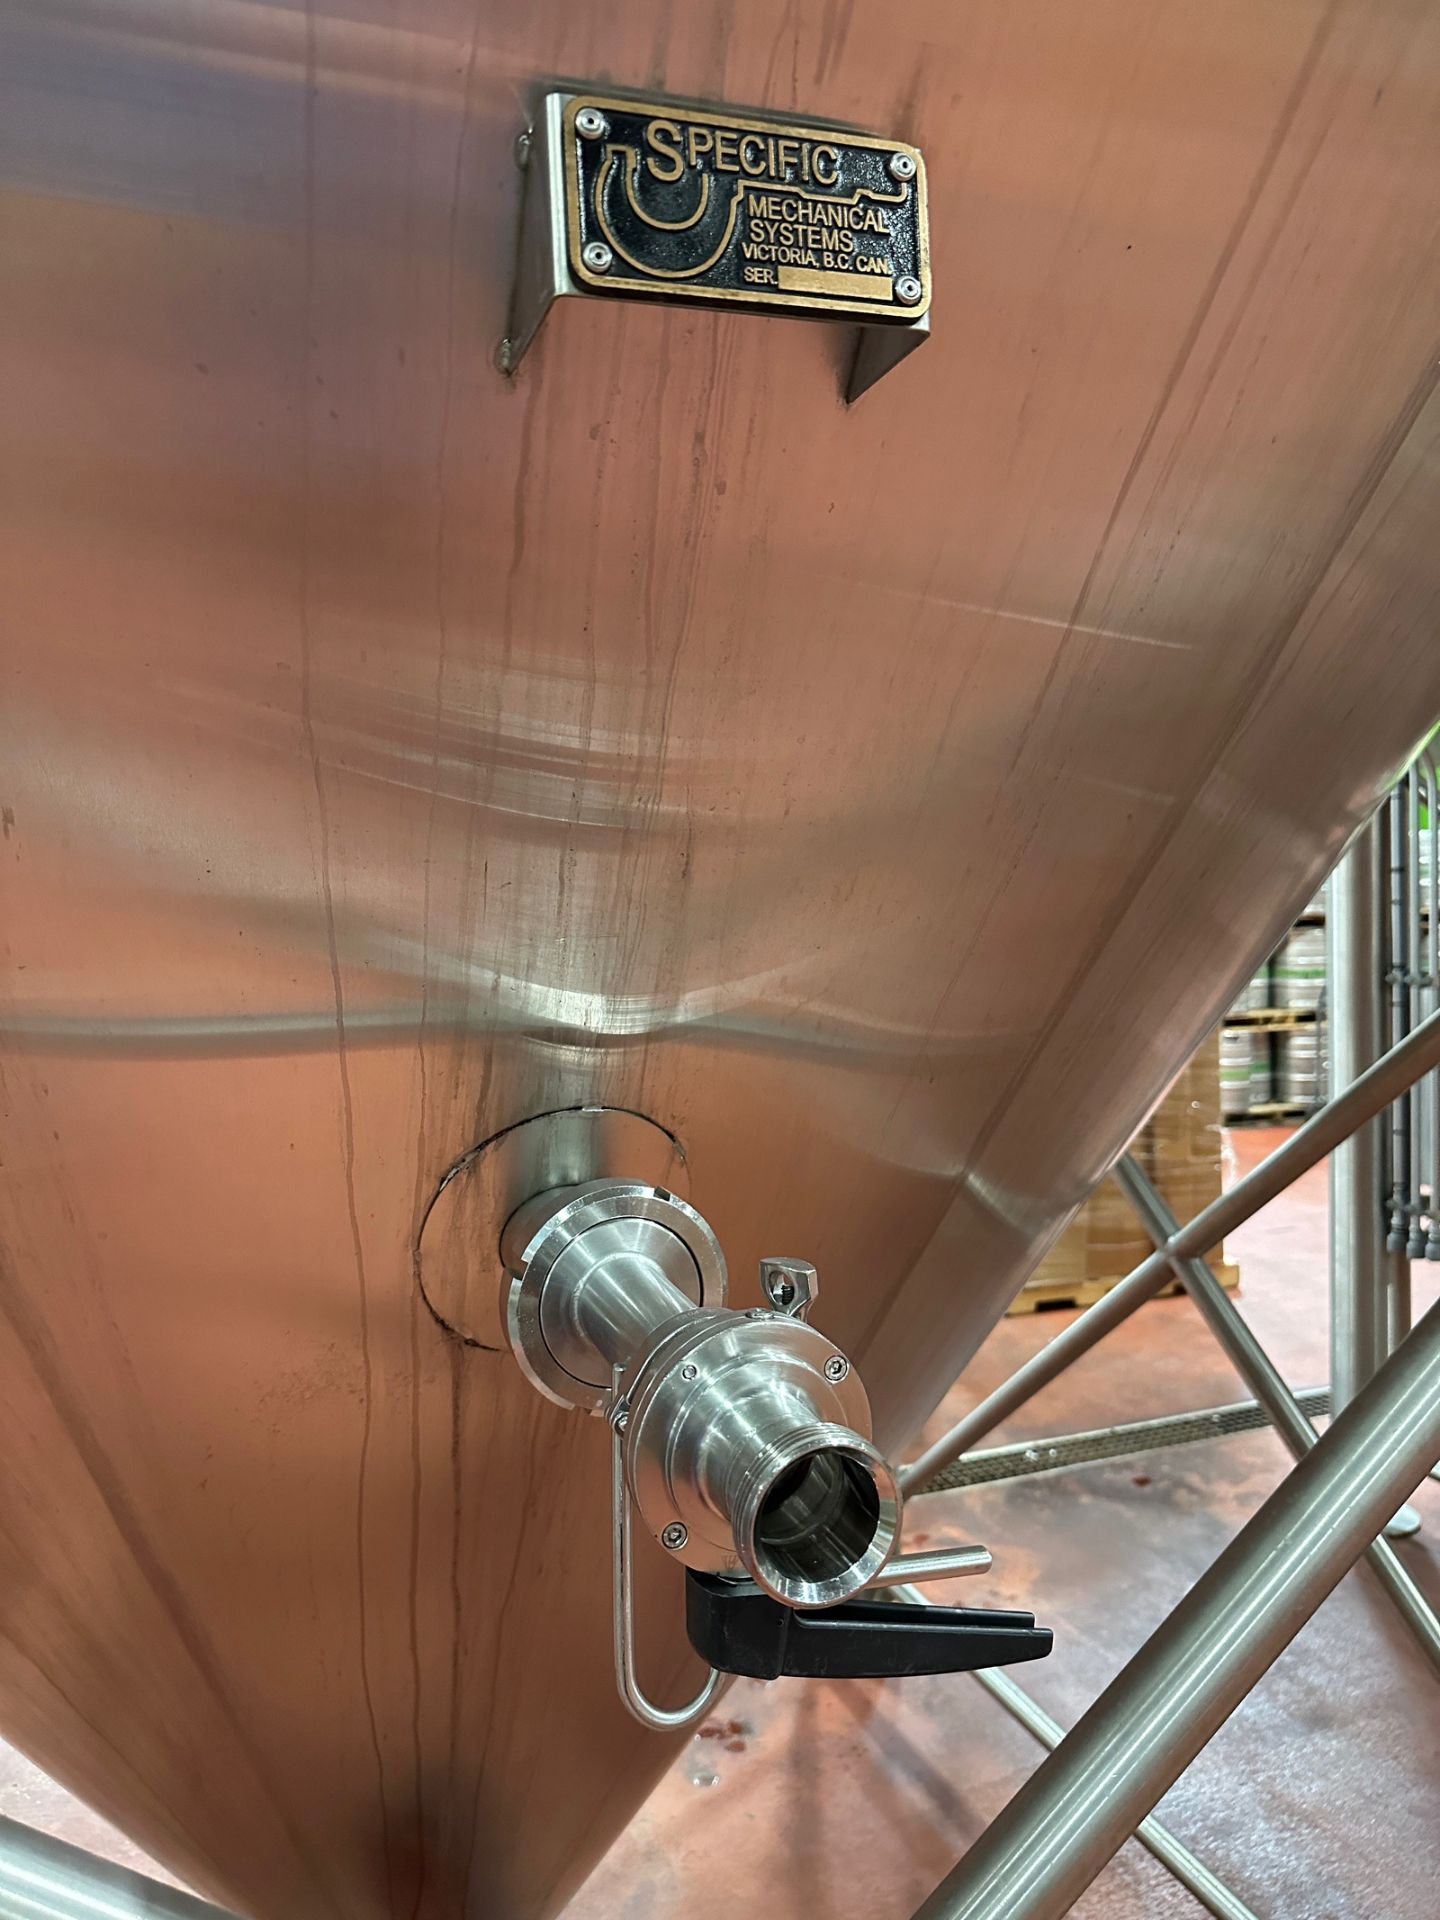 2016 - 300 BBL Specific Mechanical Stainless Steel Fermentation Tank - Cone Bottom, | Rig Fee $2900 - Image 3 of 6